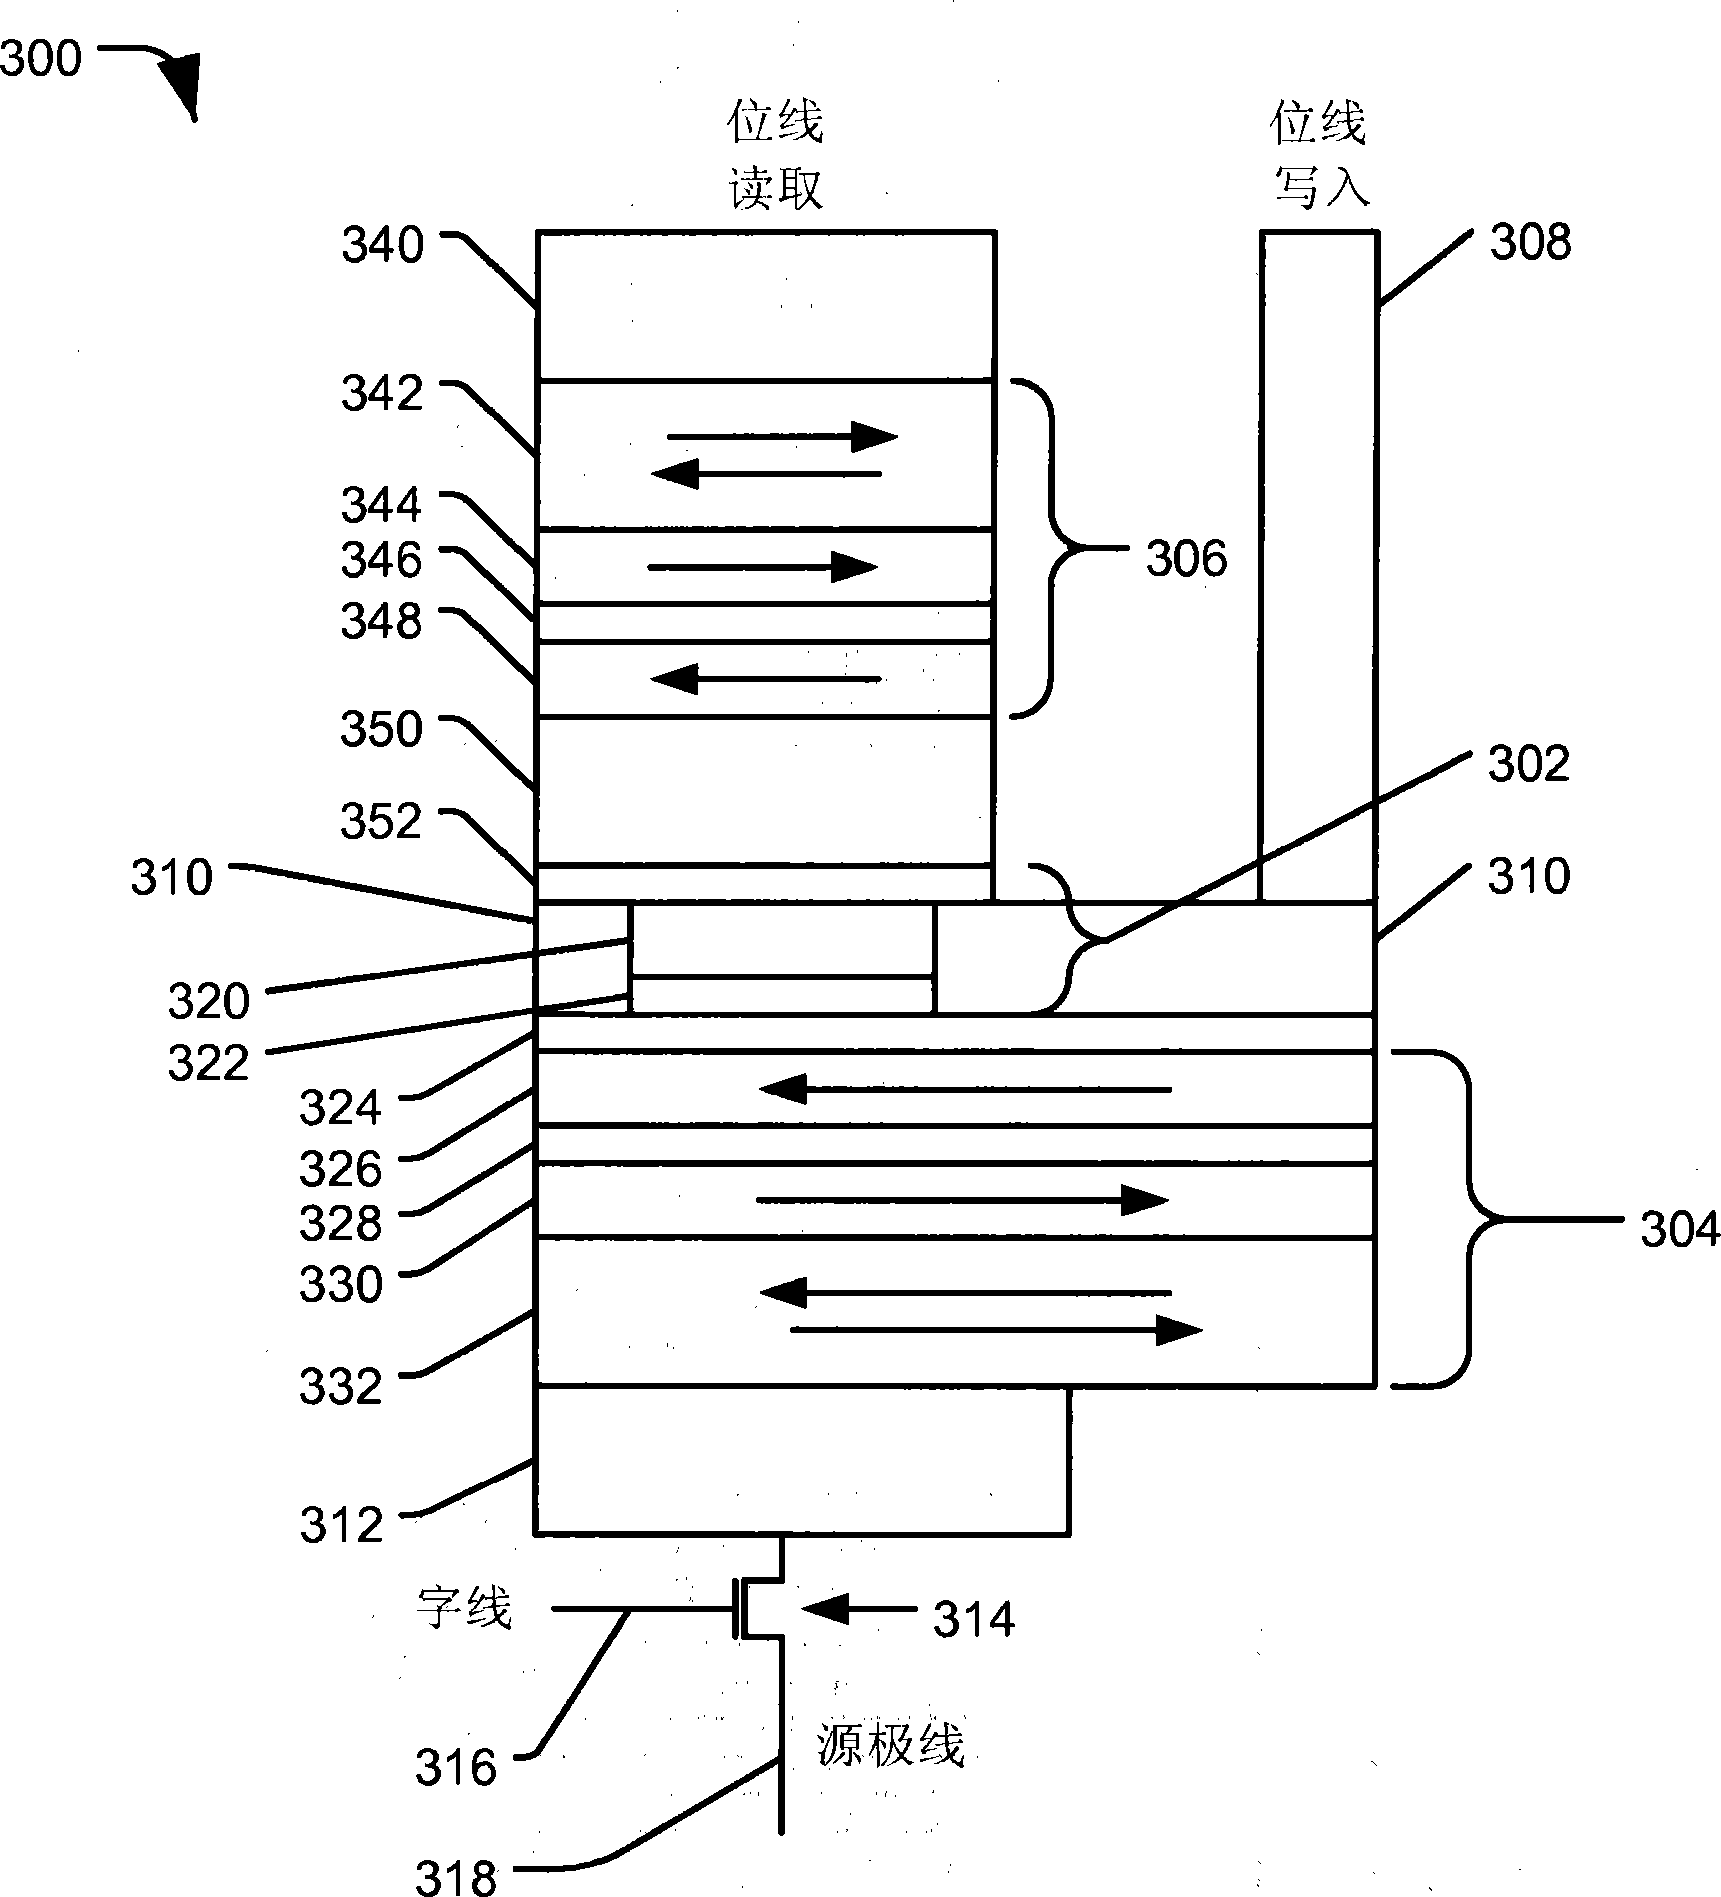 Magnetic tunnel junction device with separate read and write paths